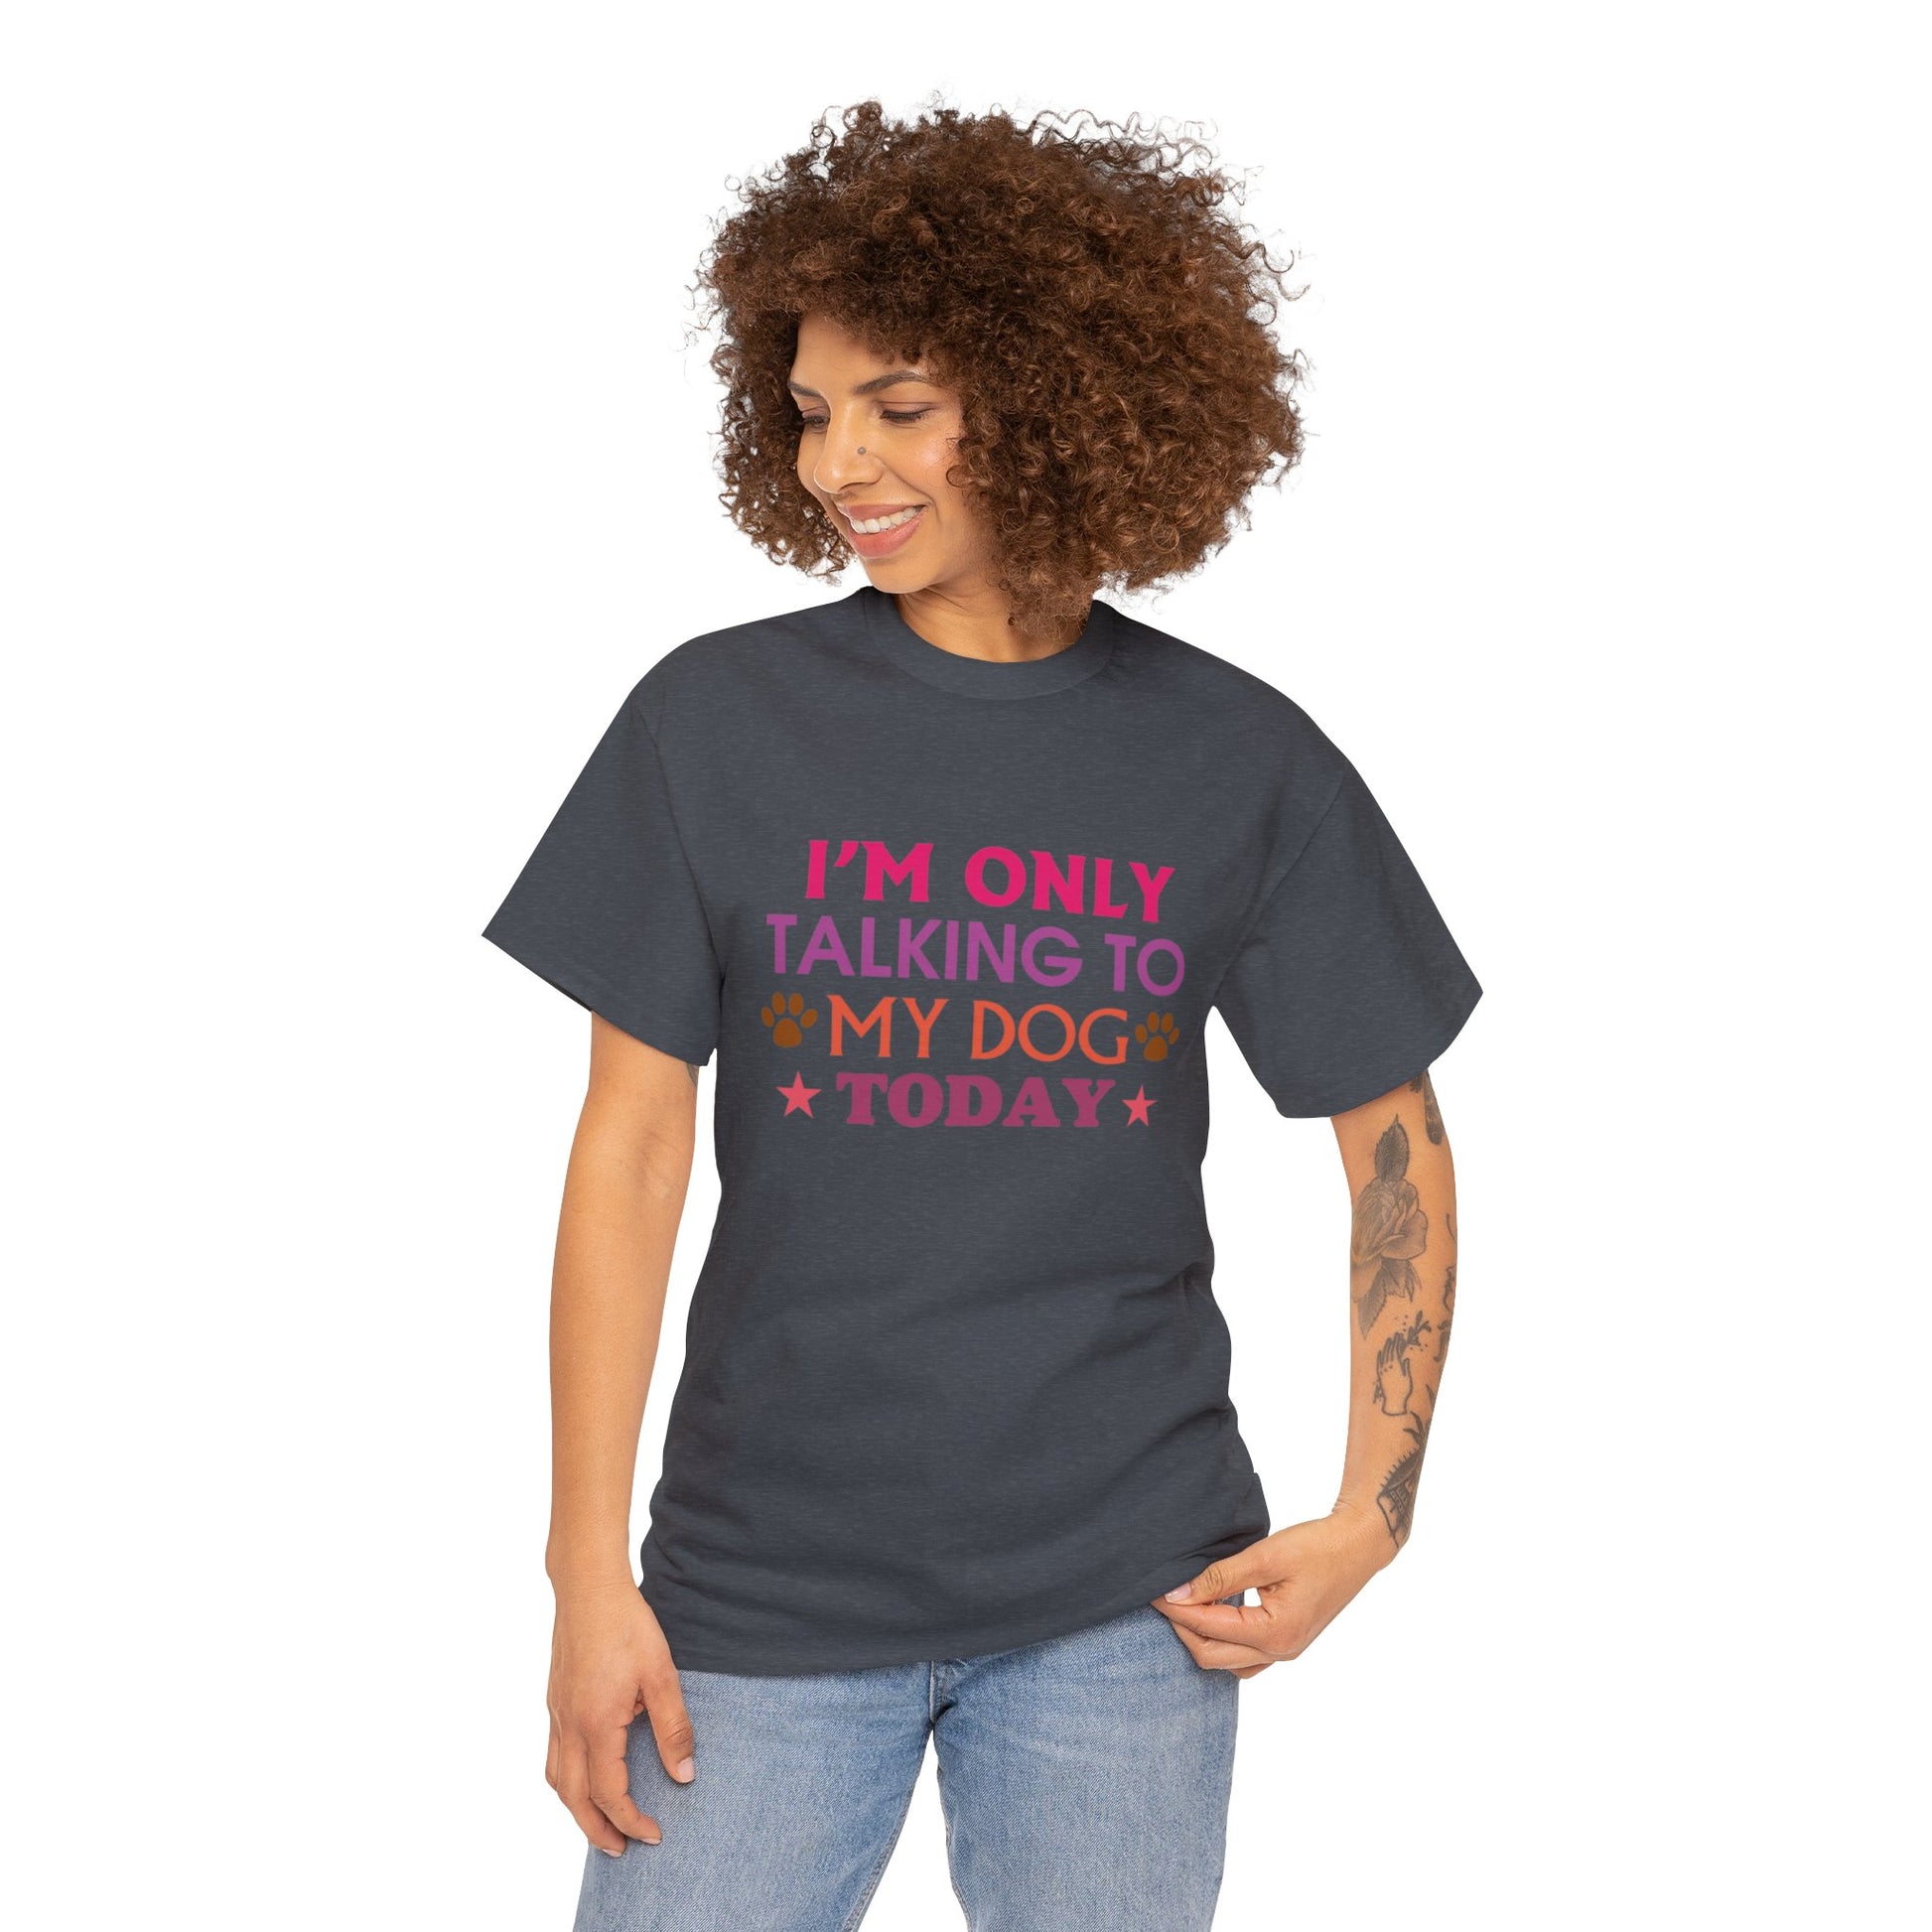 "Only Talking To My Dog" T-Shirt - Weave Got Gifts - Unique Gifts You Won’t Find Anywhere Else!